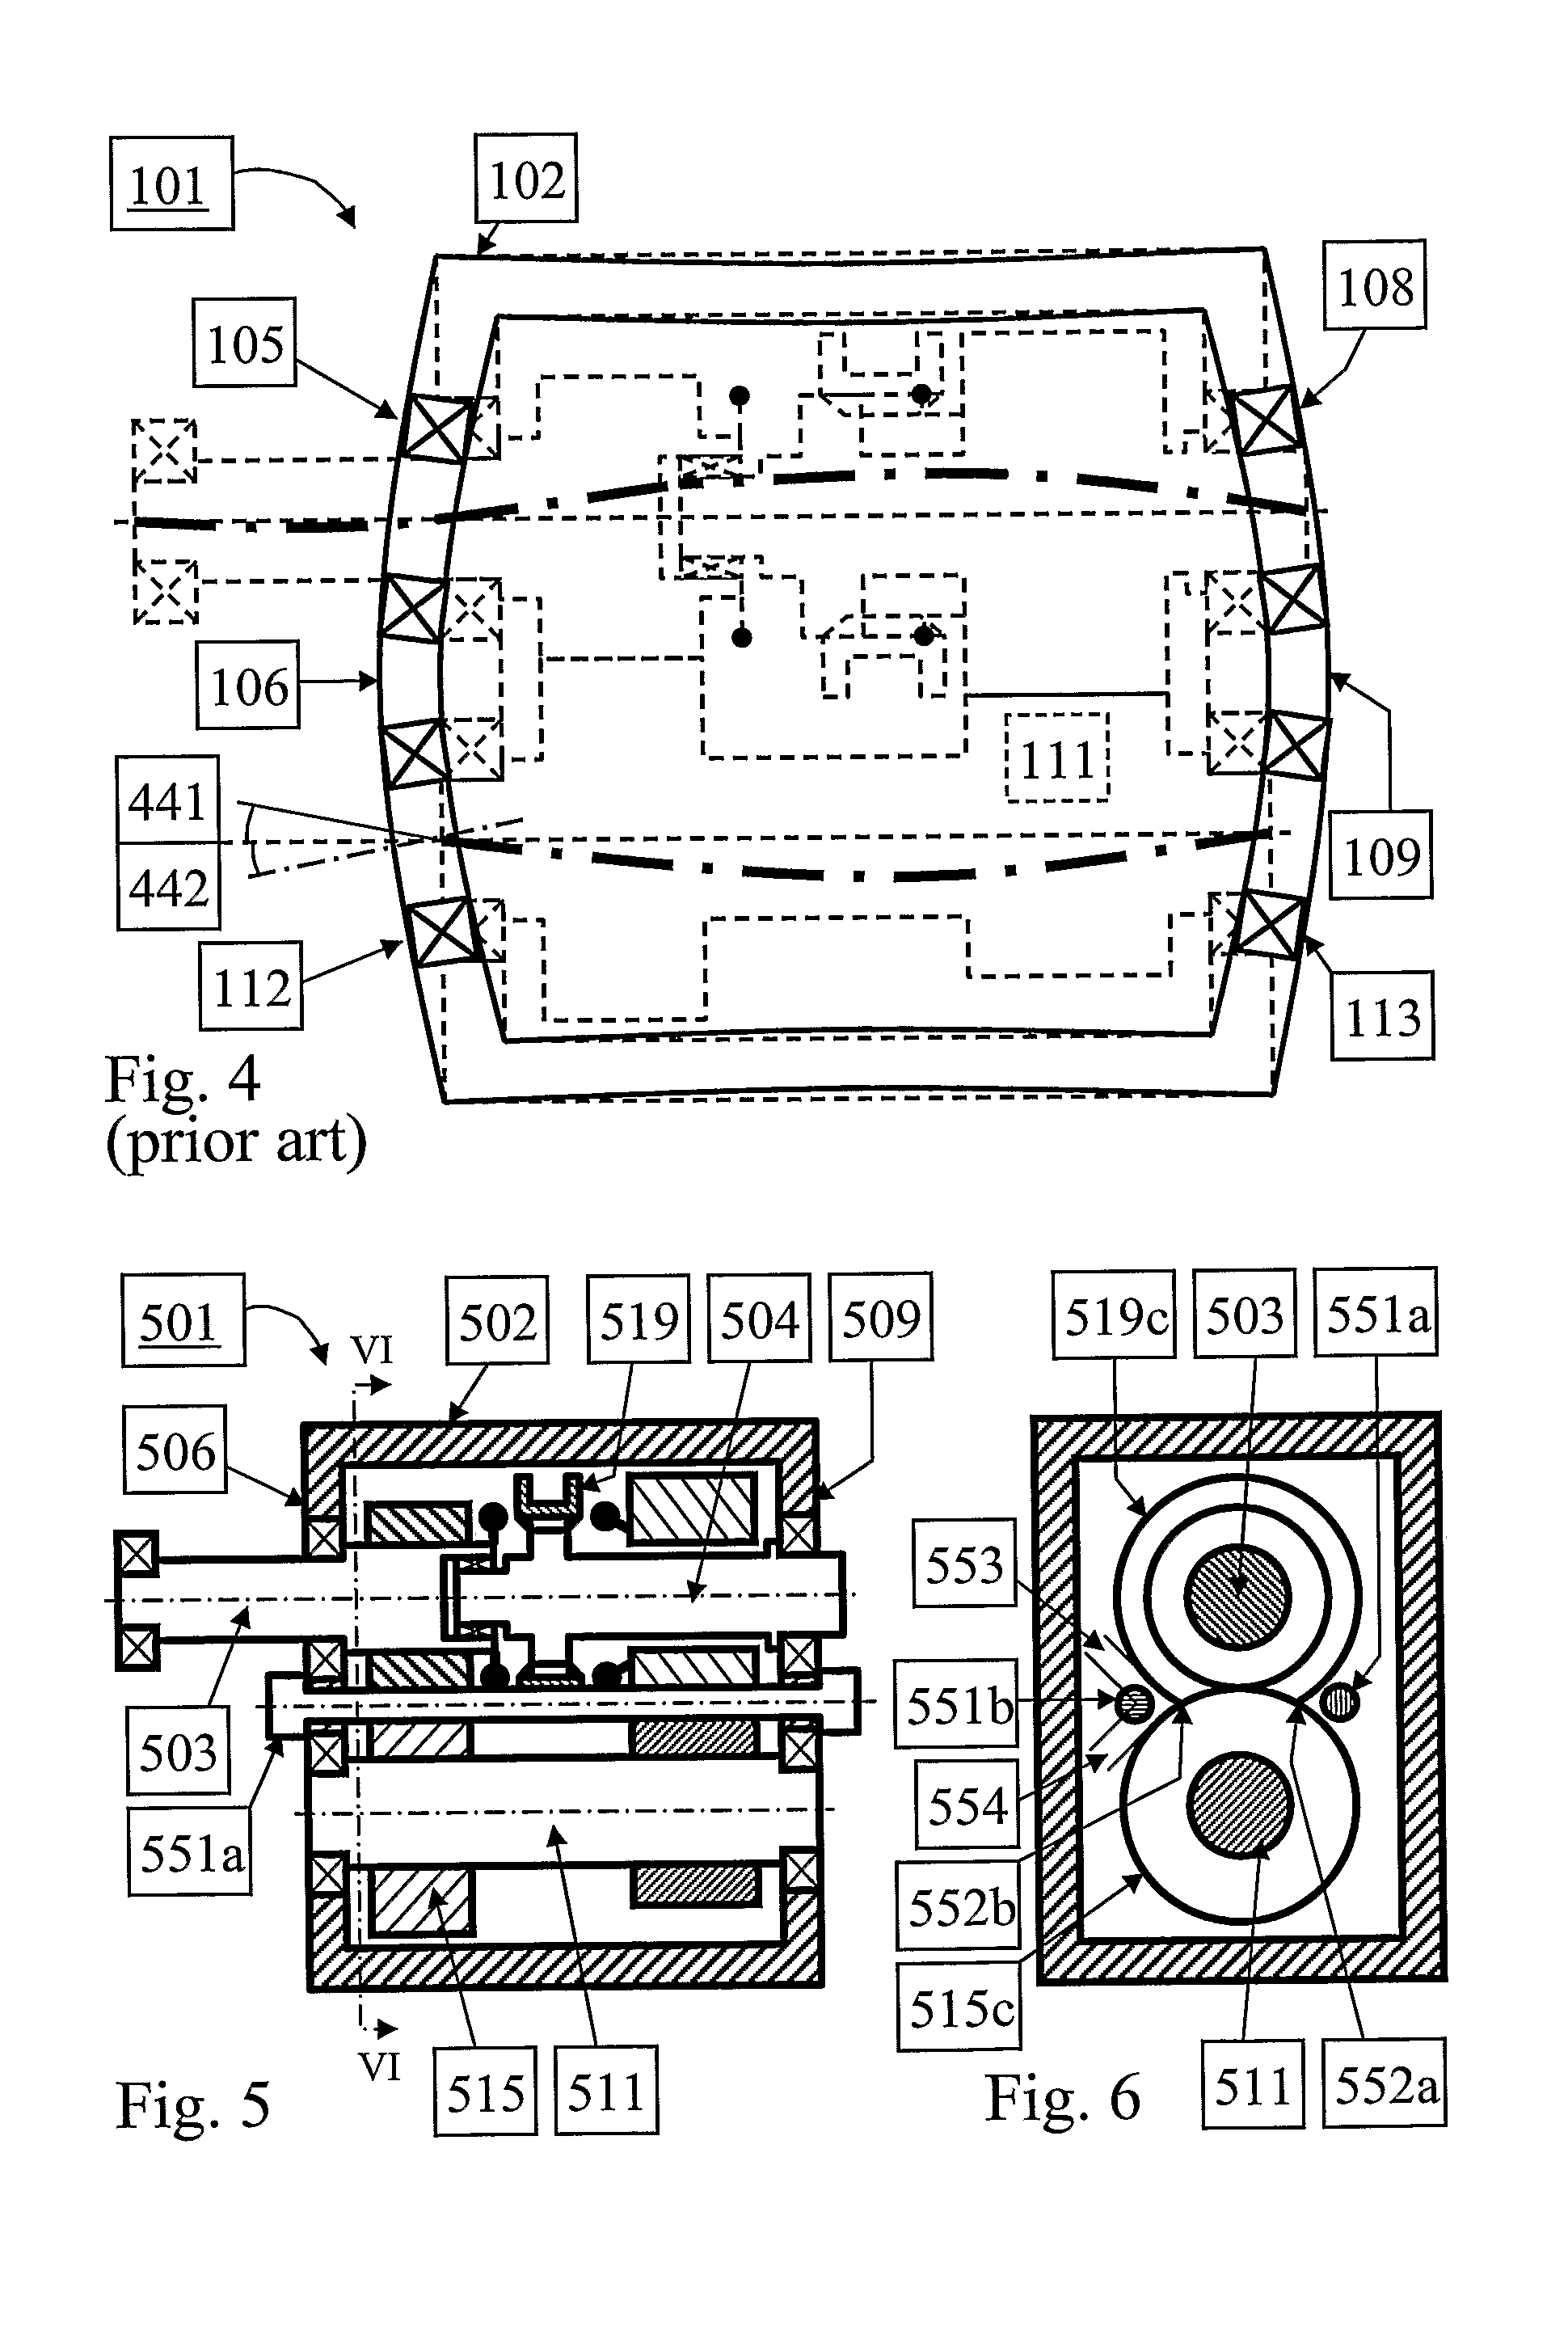 Gear transmission with reduced transmission wall housing deflection